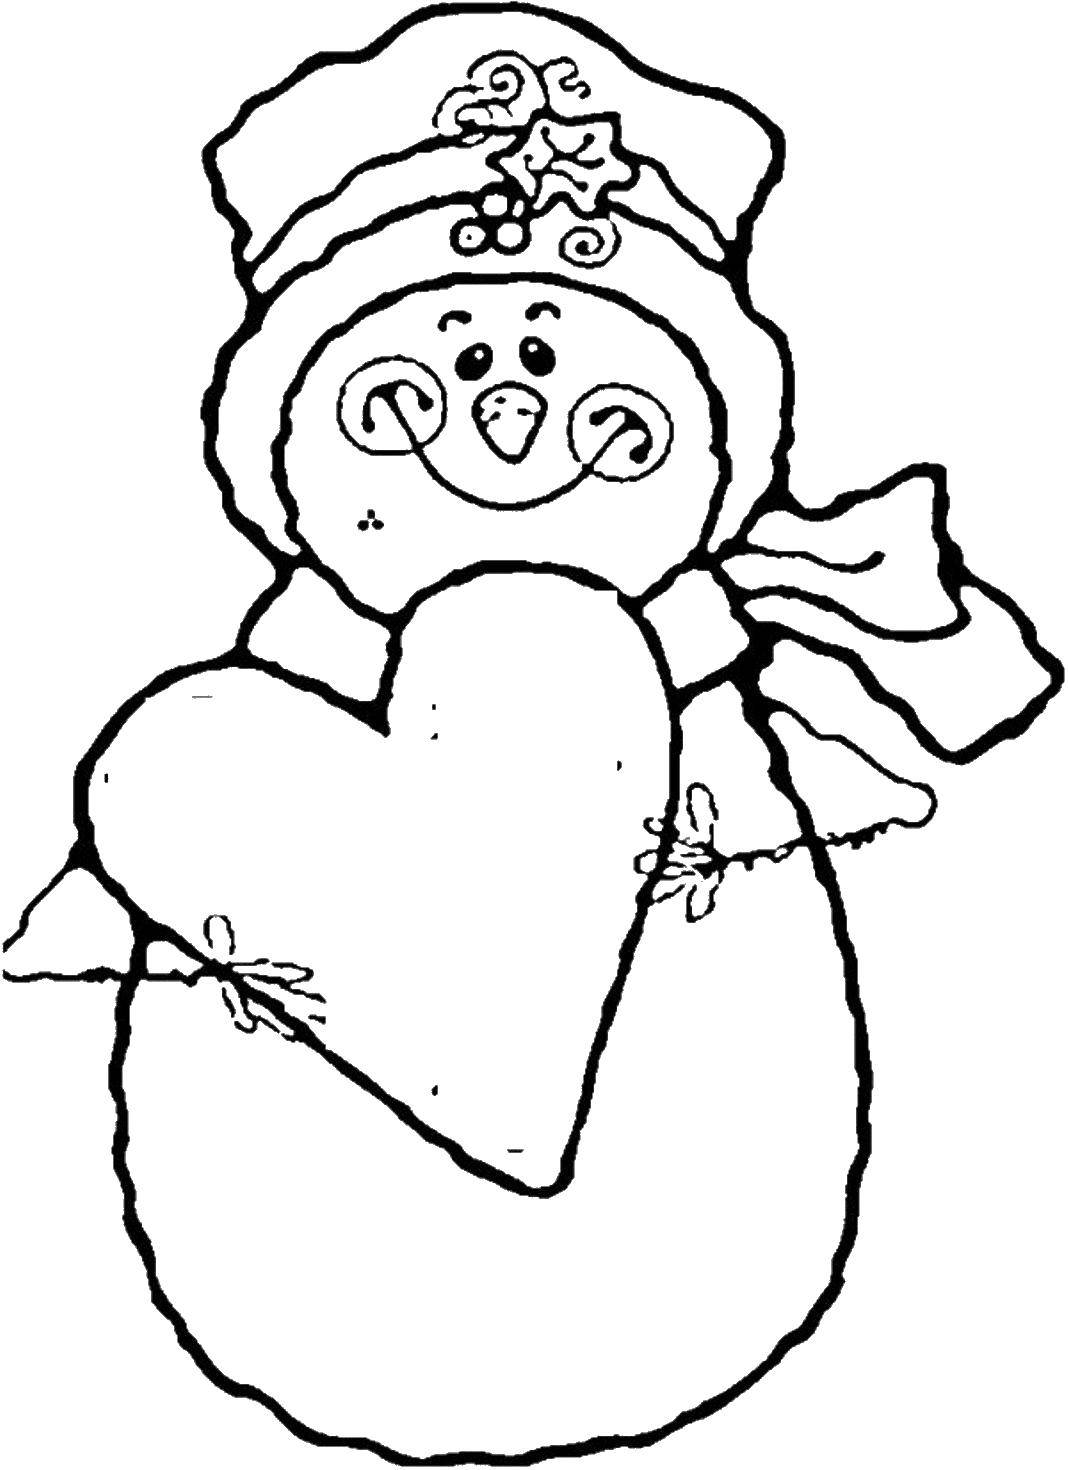 Coloring Snowman. Category Coloring pages for kids. Tags:  snowman, heart.